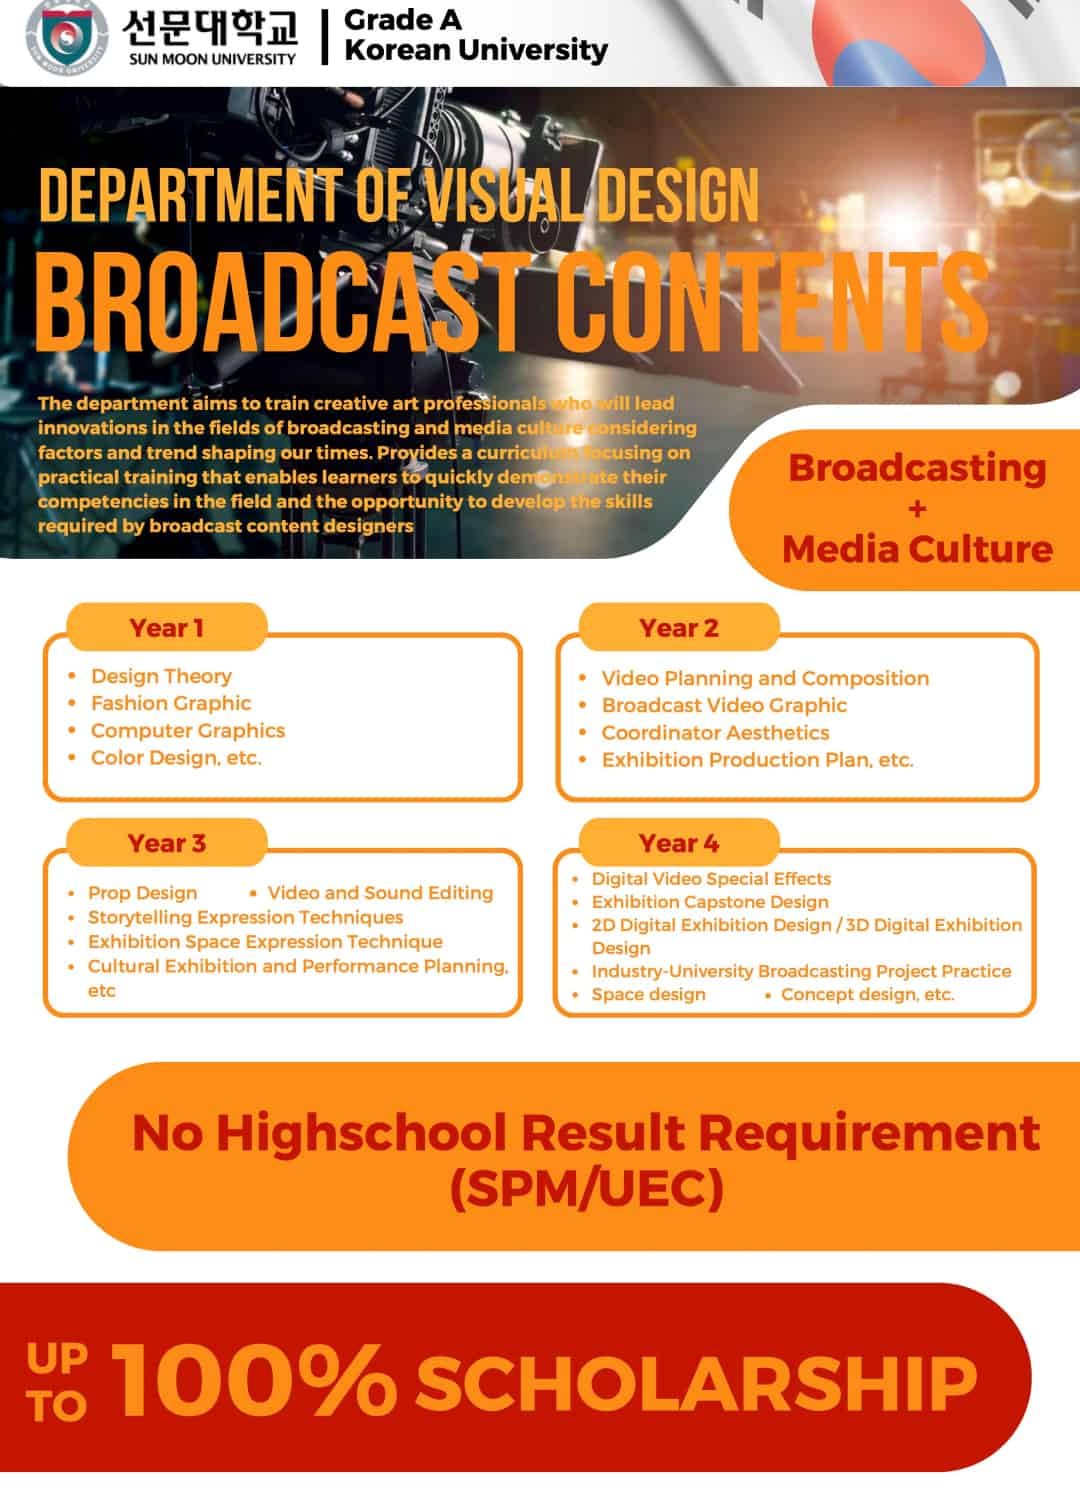   Broadcast Contents